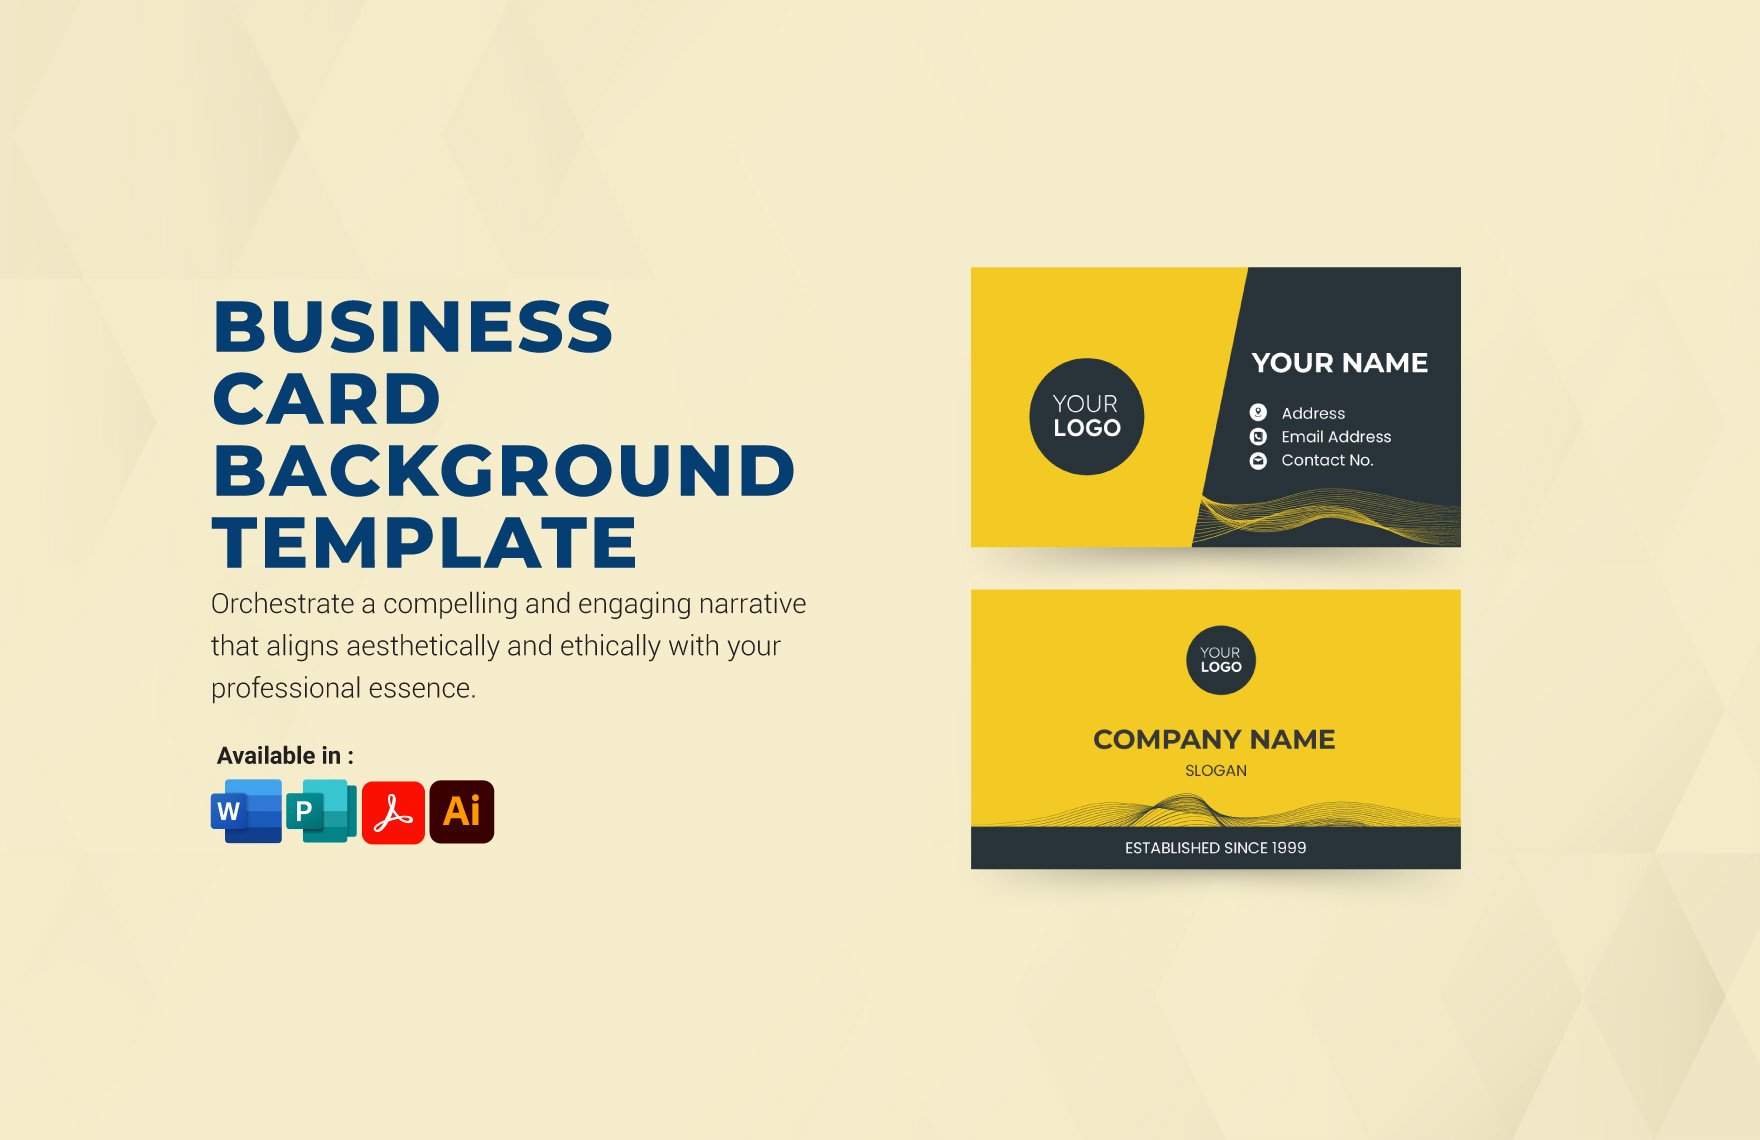 Business Card Background Template